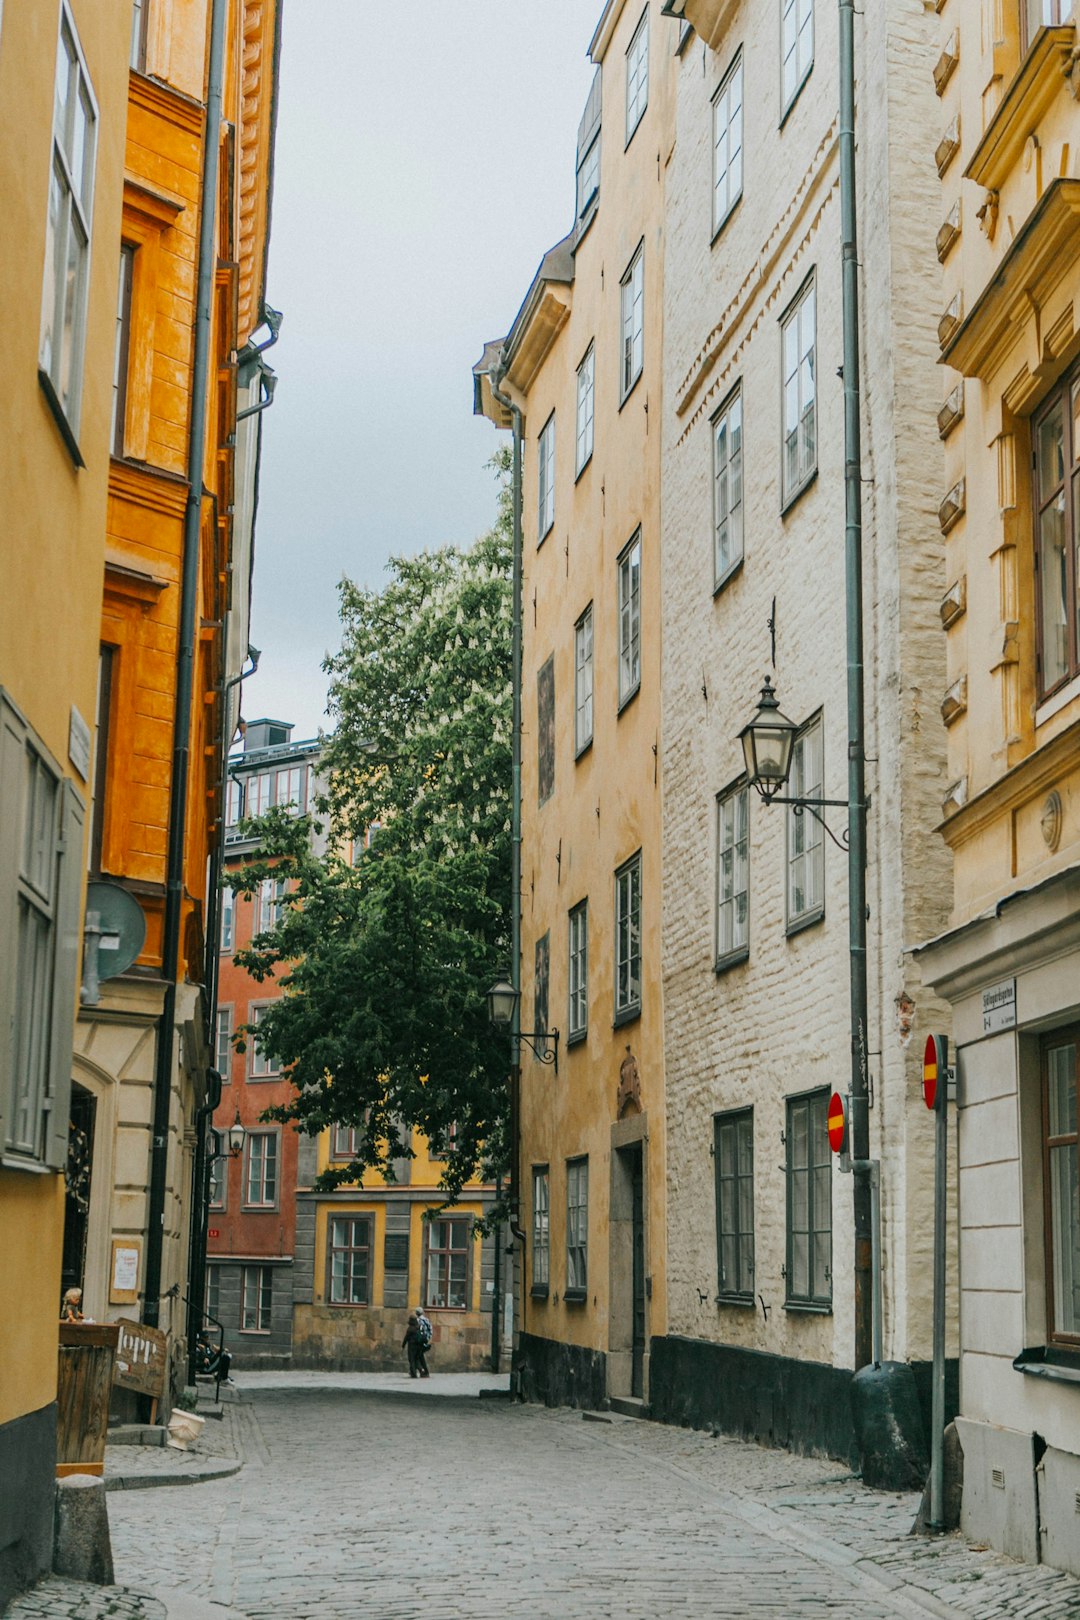 travelers stories about Town in Gamla stan, Sweden